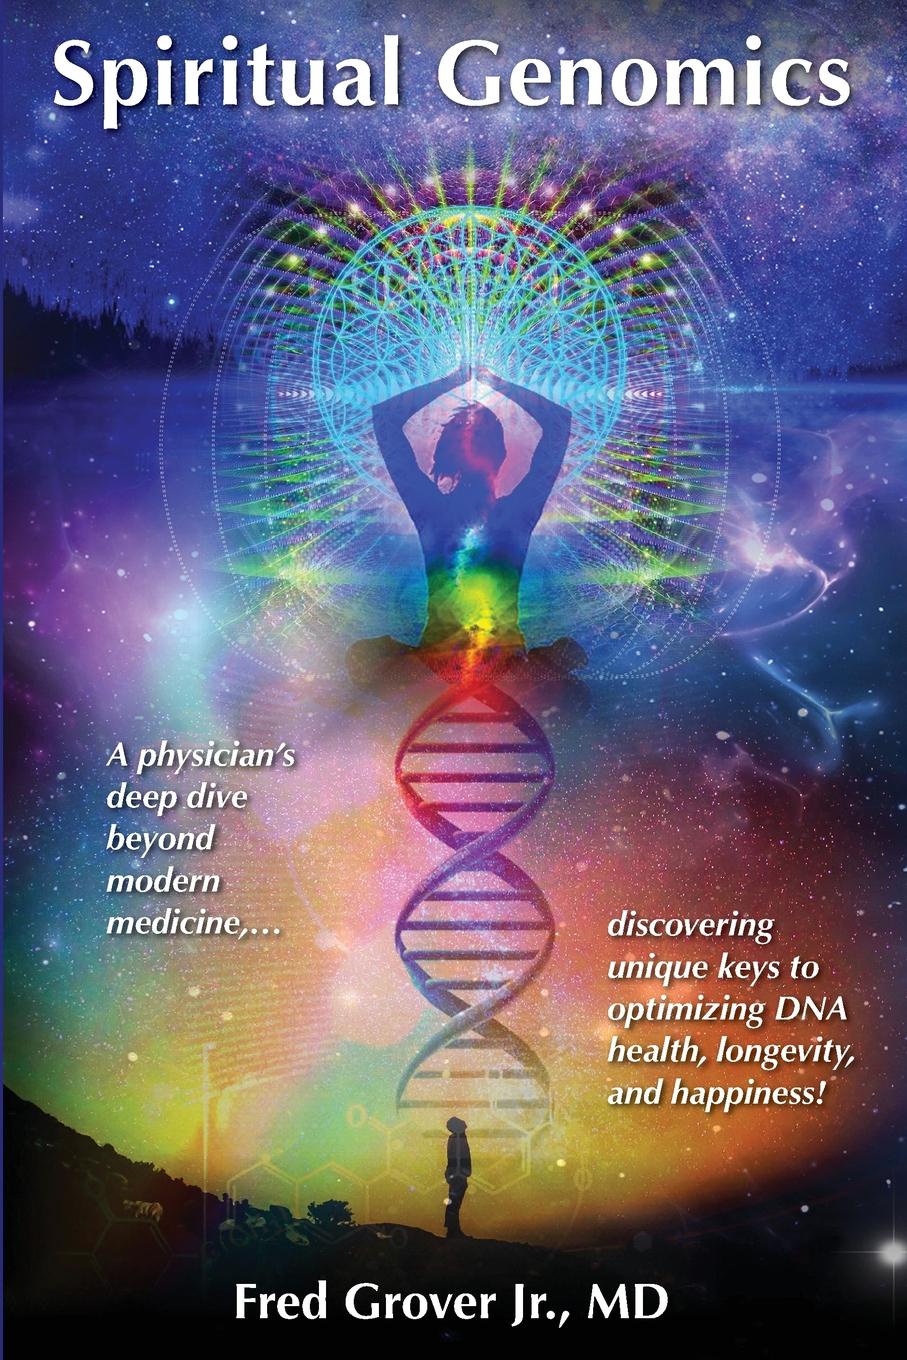 Spiritual Genomics. A physician.s deep dive beyond modern medicine, discovering unique keys to optimizing DNA health, longevity, and happiness.